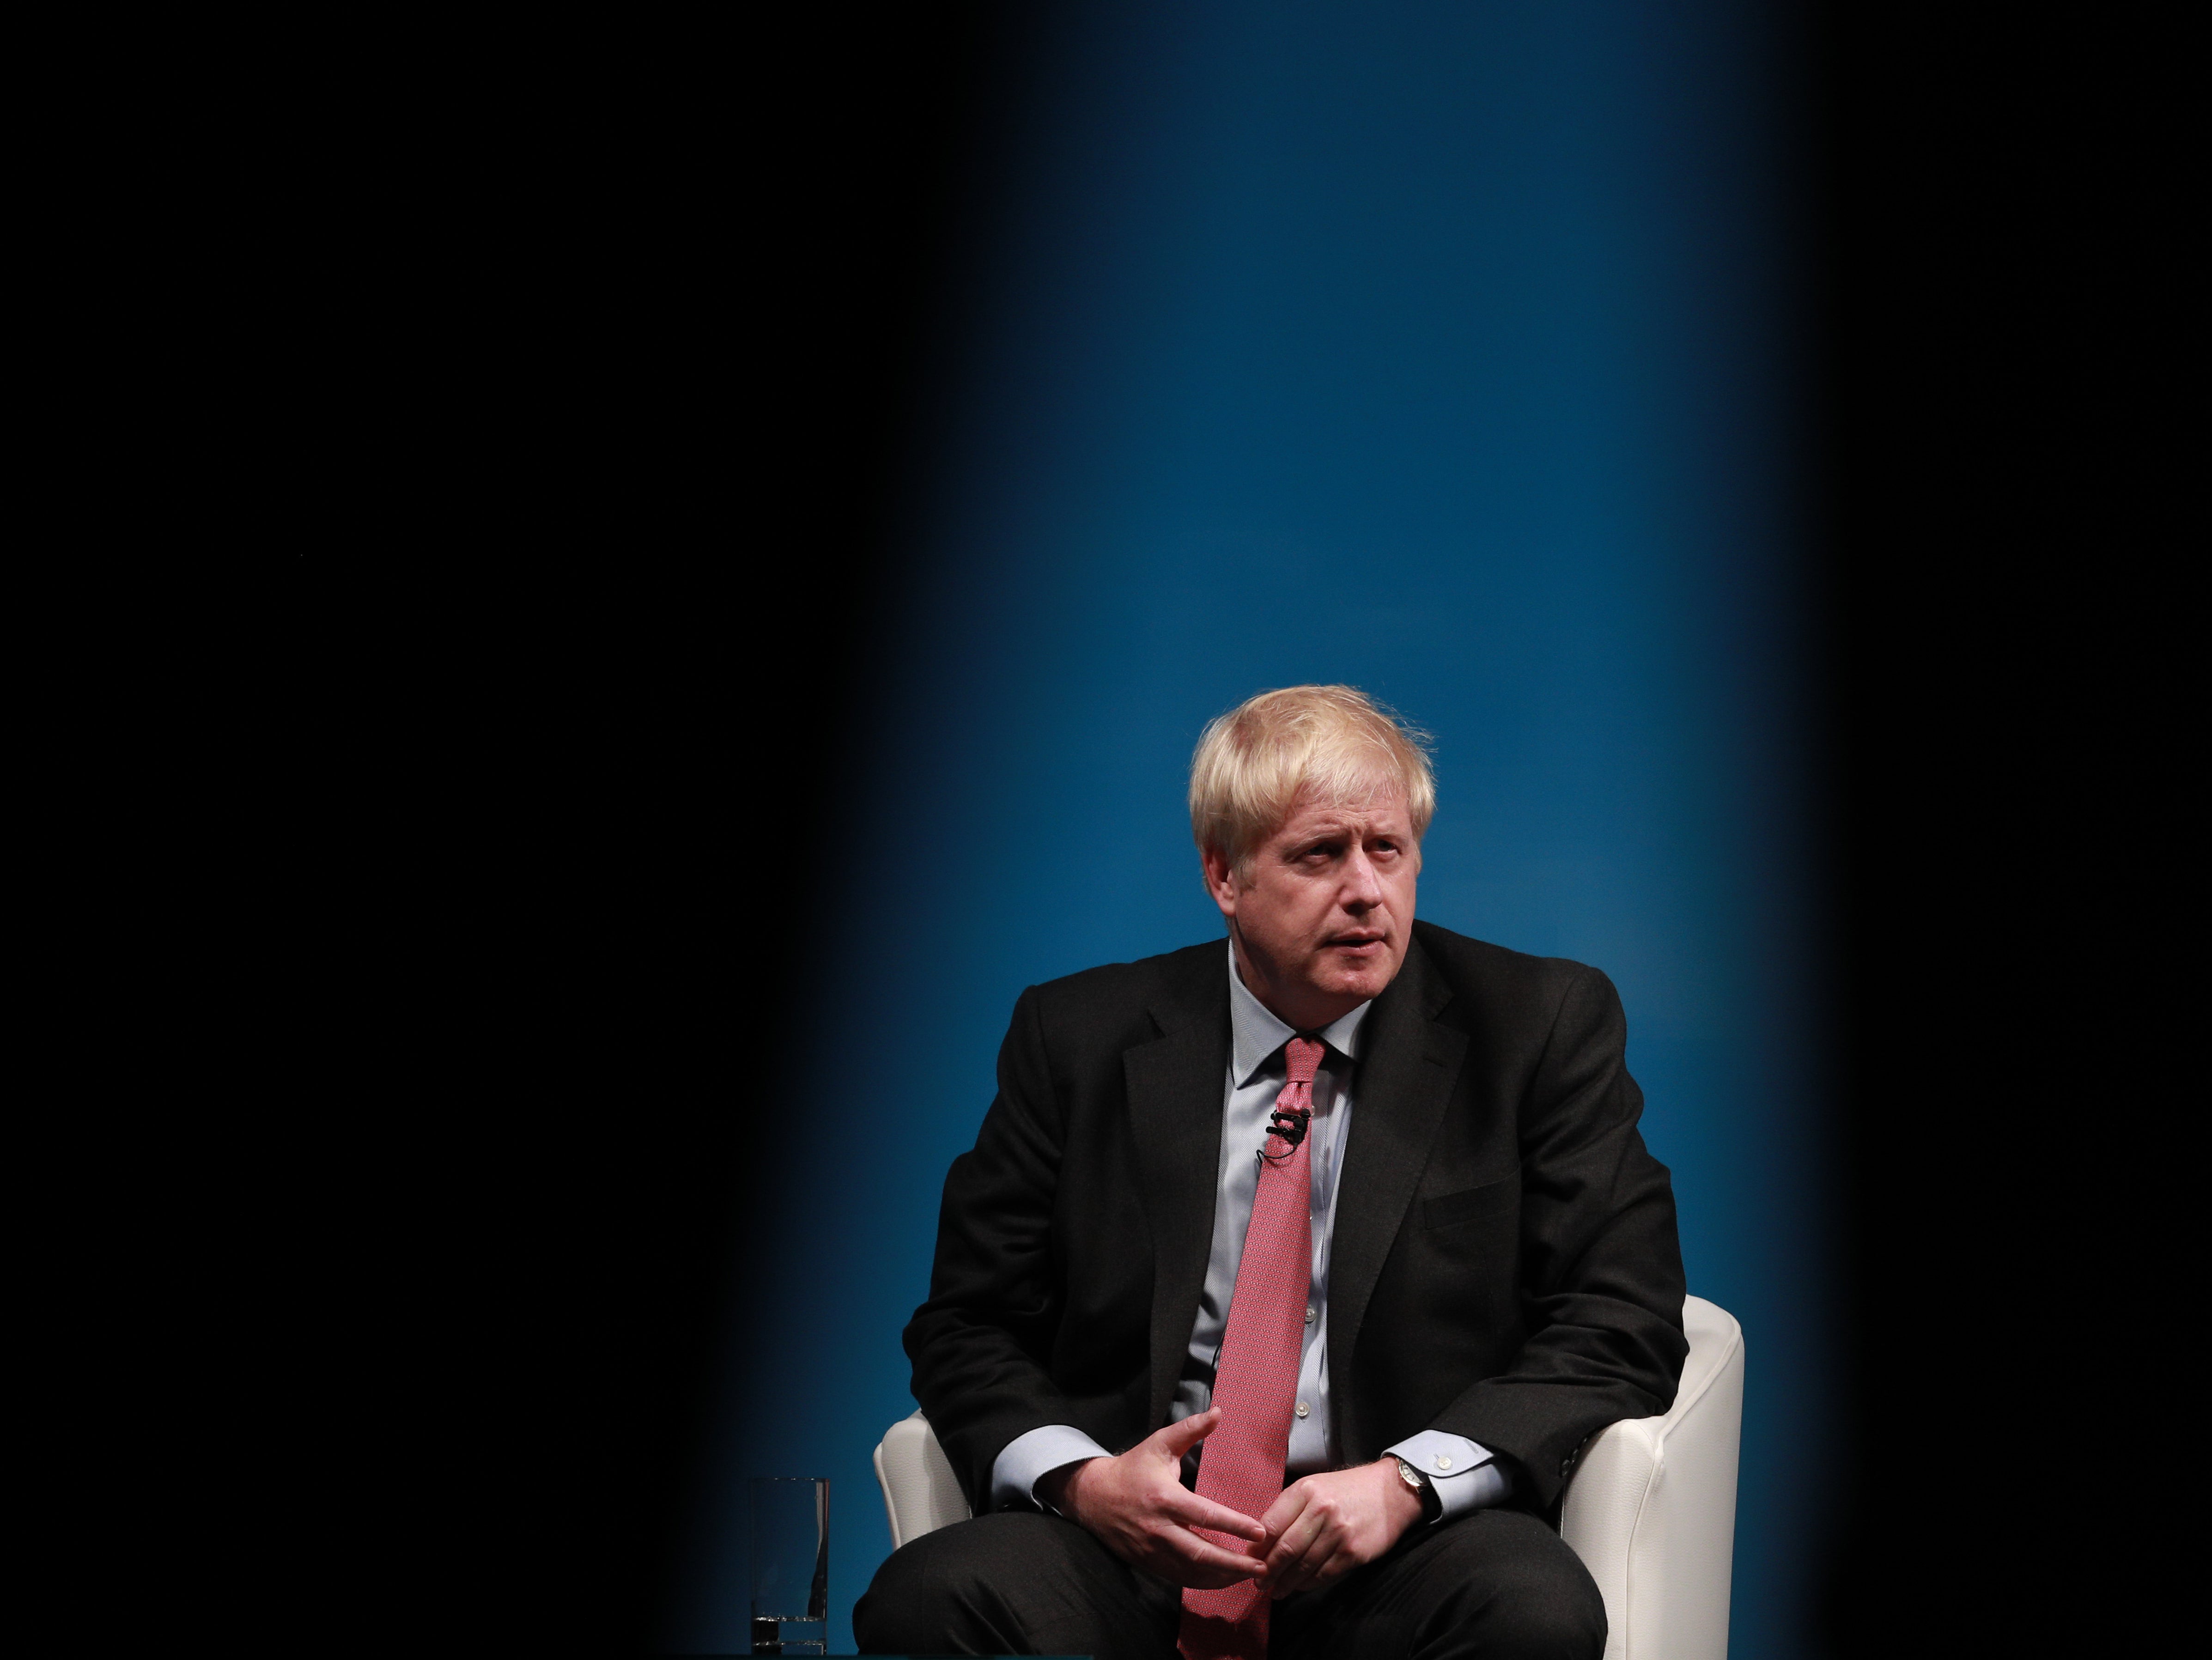 Prime Minister Boris Johnson rightly understands that levelling up is a national challenge but one delivered at a local level